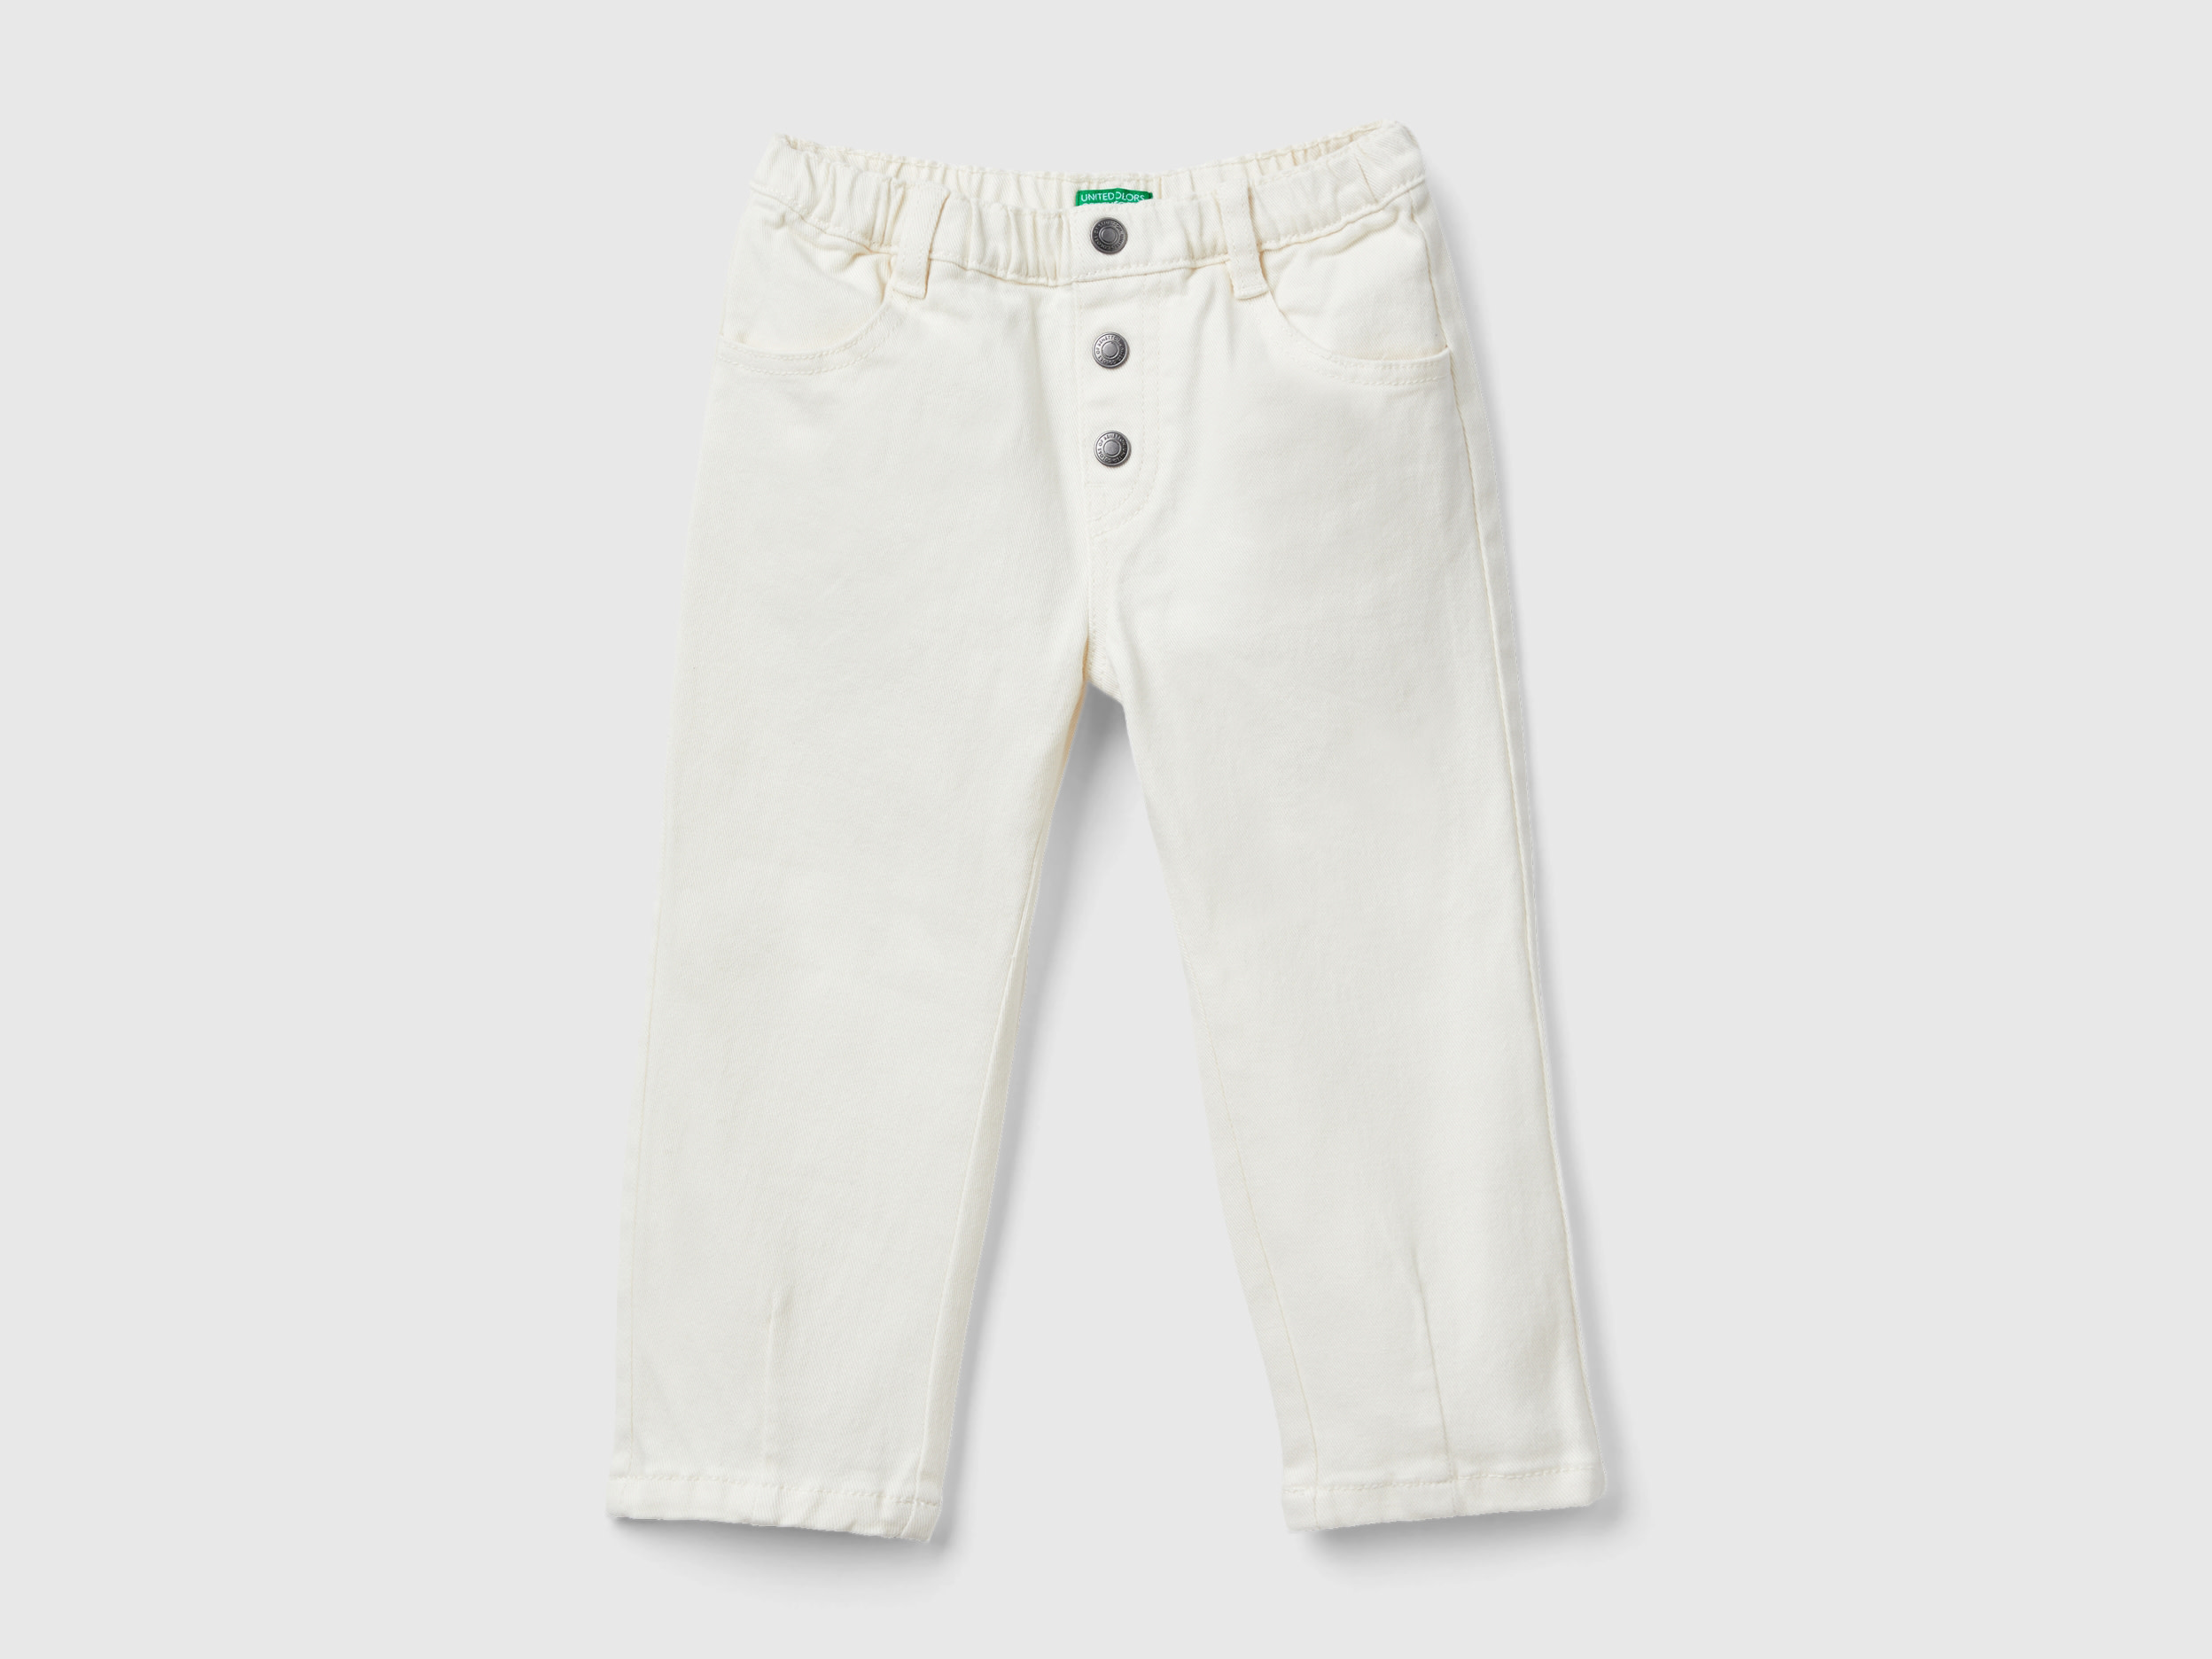 Benetton, Baggy Fit Trousers, size 5-6, Creamy White, Kids